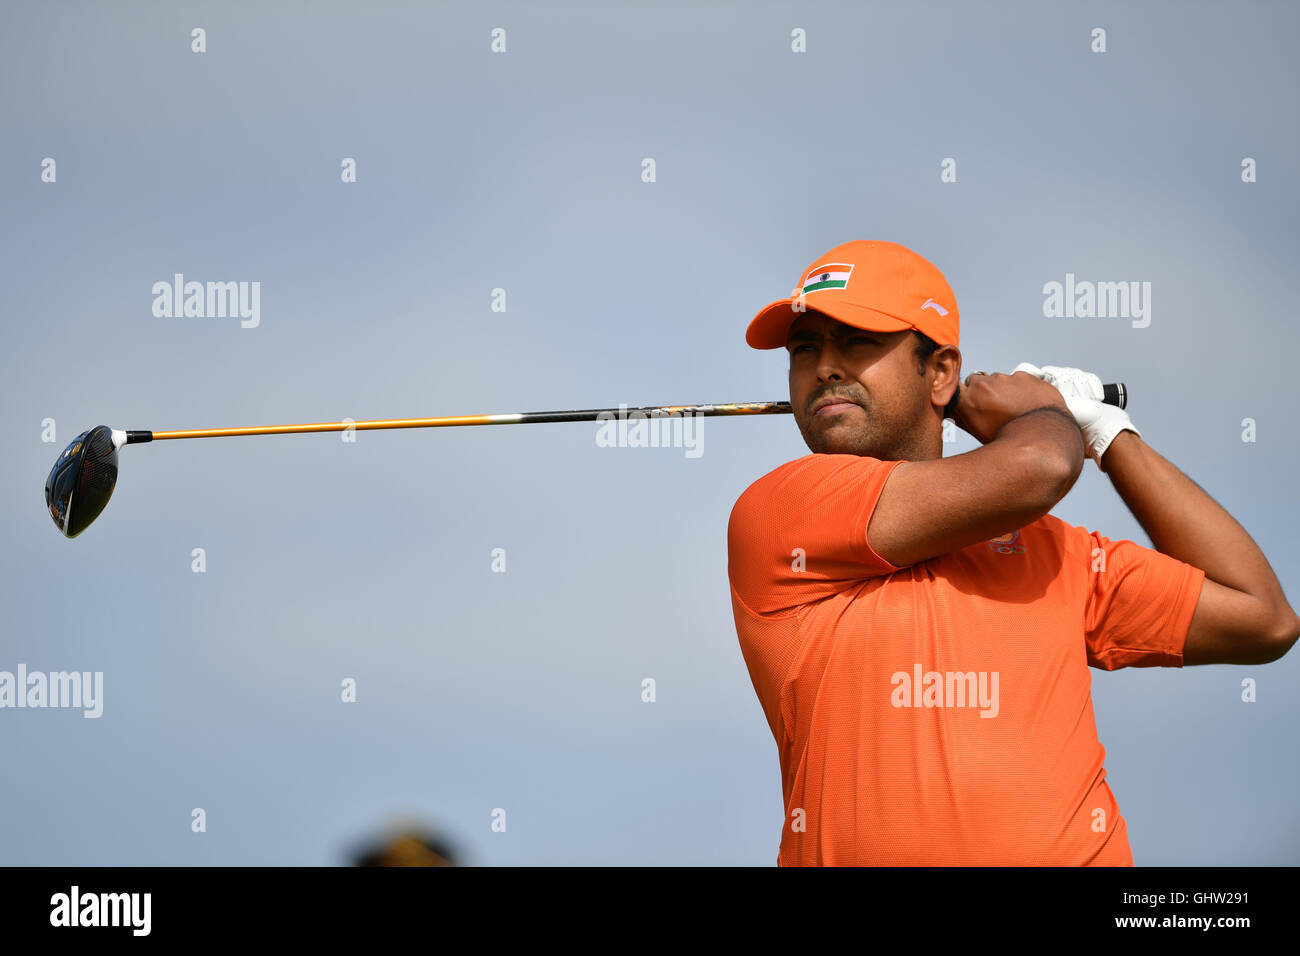 Rio de Janeiro, Brazil. 11th Aug, 2016. Anirban Lahiri of India during the Men's Individual Stroke Play Round 1 of the Golf events during the Olympic Games at the Olympic Golf Course in Rio de Janeiro, Brazil, 11 August 2016. Photo: Lukas Schulze/dpa/Alamy Live News Stock Photo